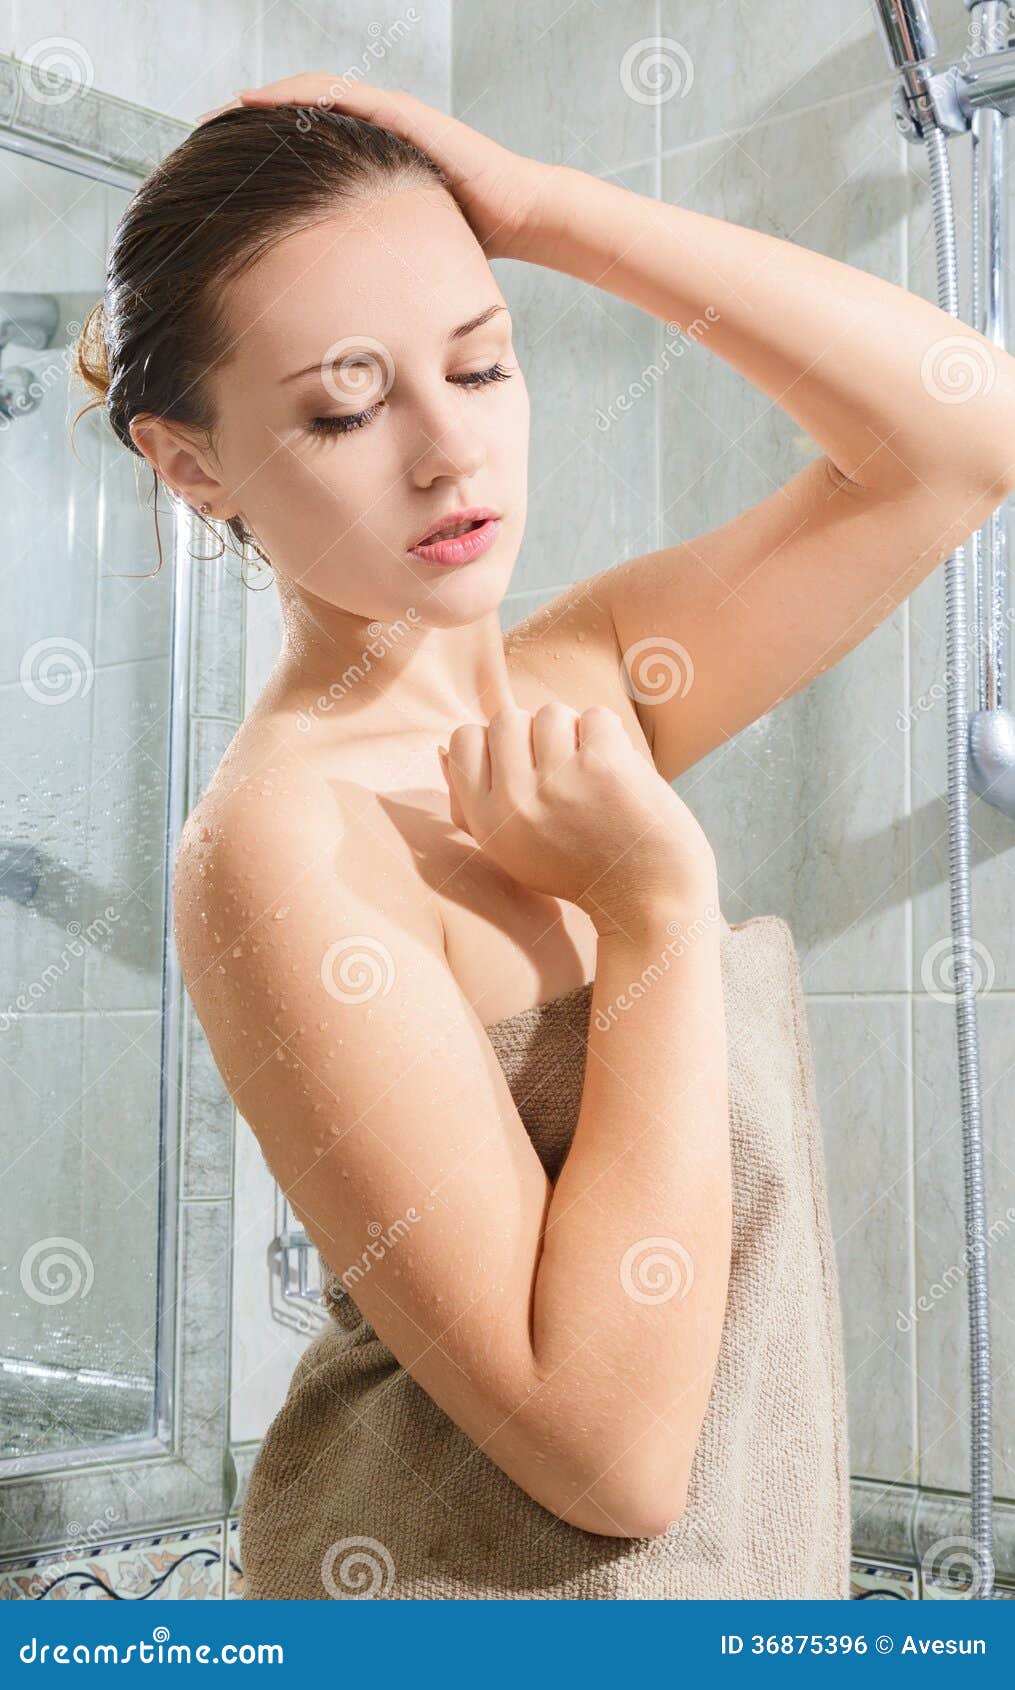 debbie hargrave recommends woman taking a shower pic